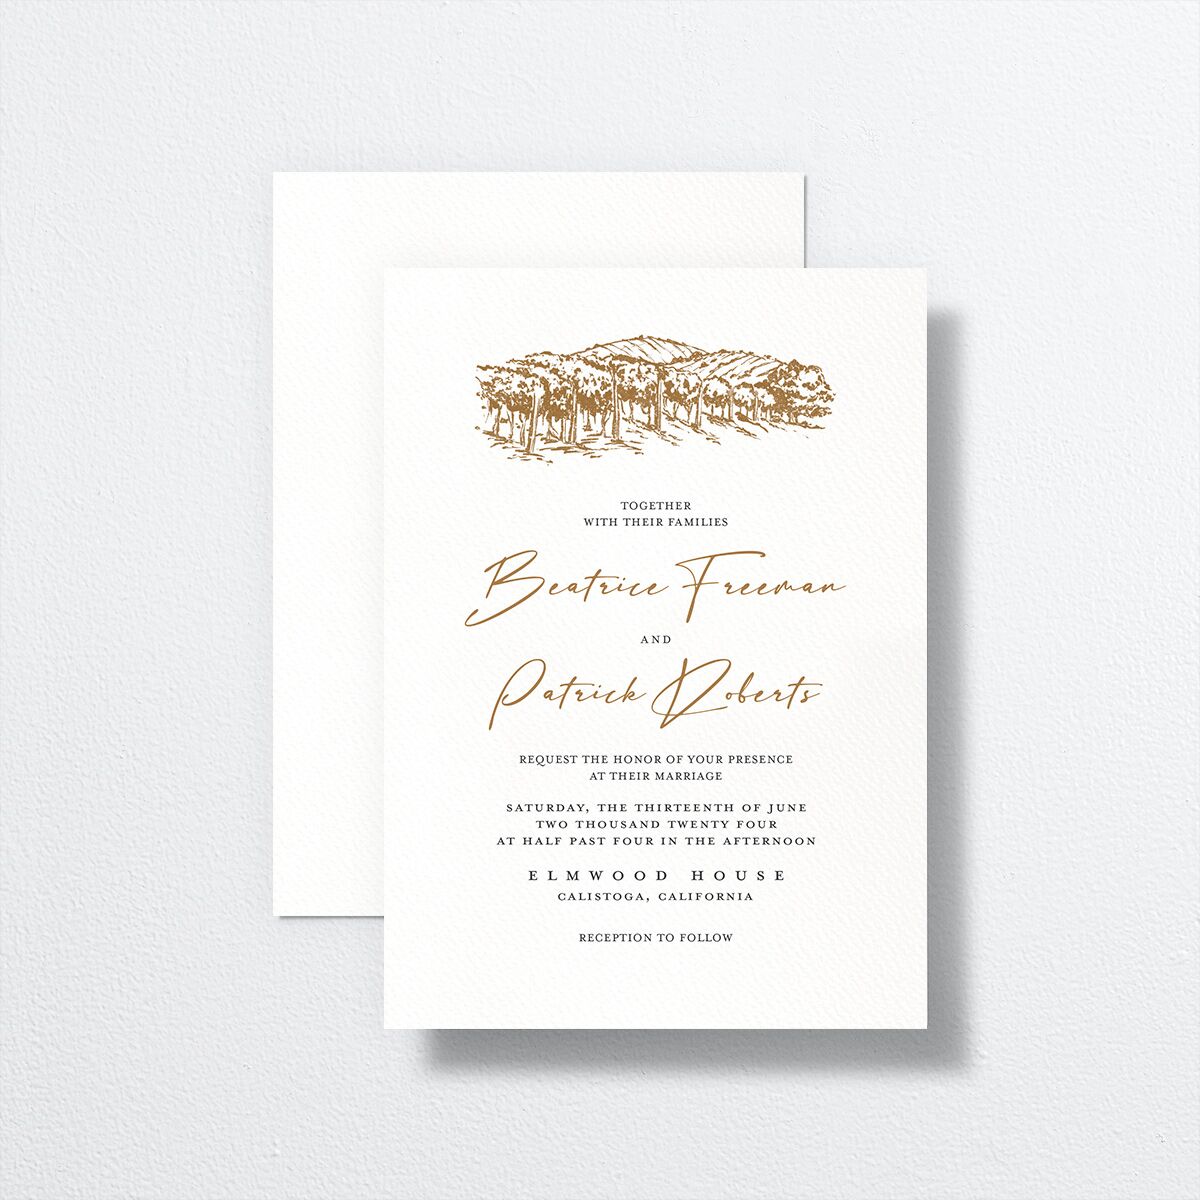 Romantic Setting Wedding Invitations front-and-back